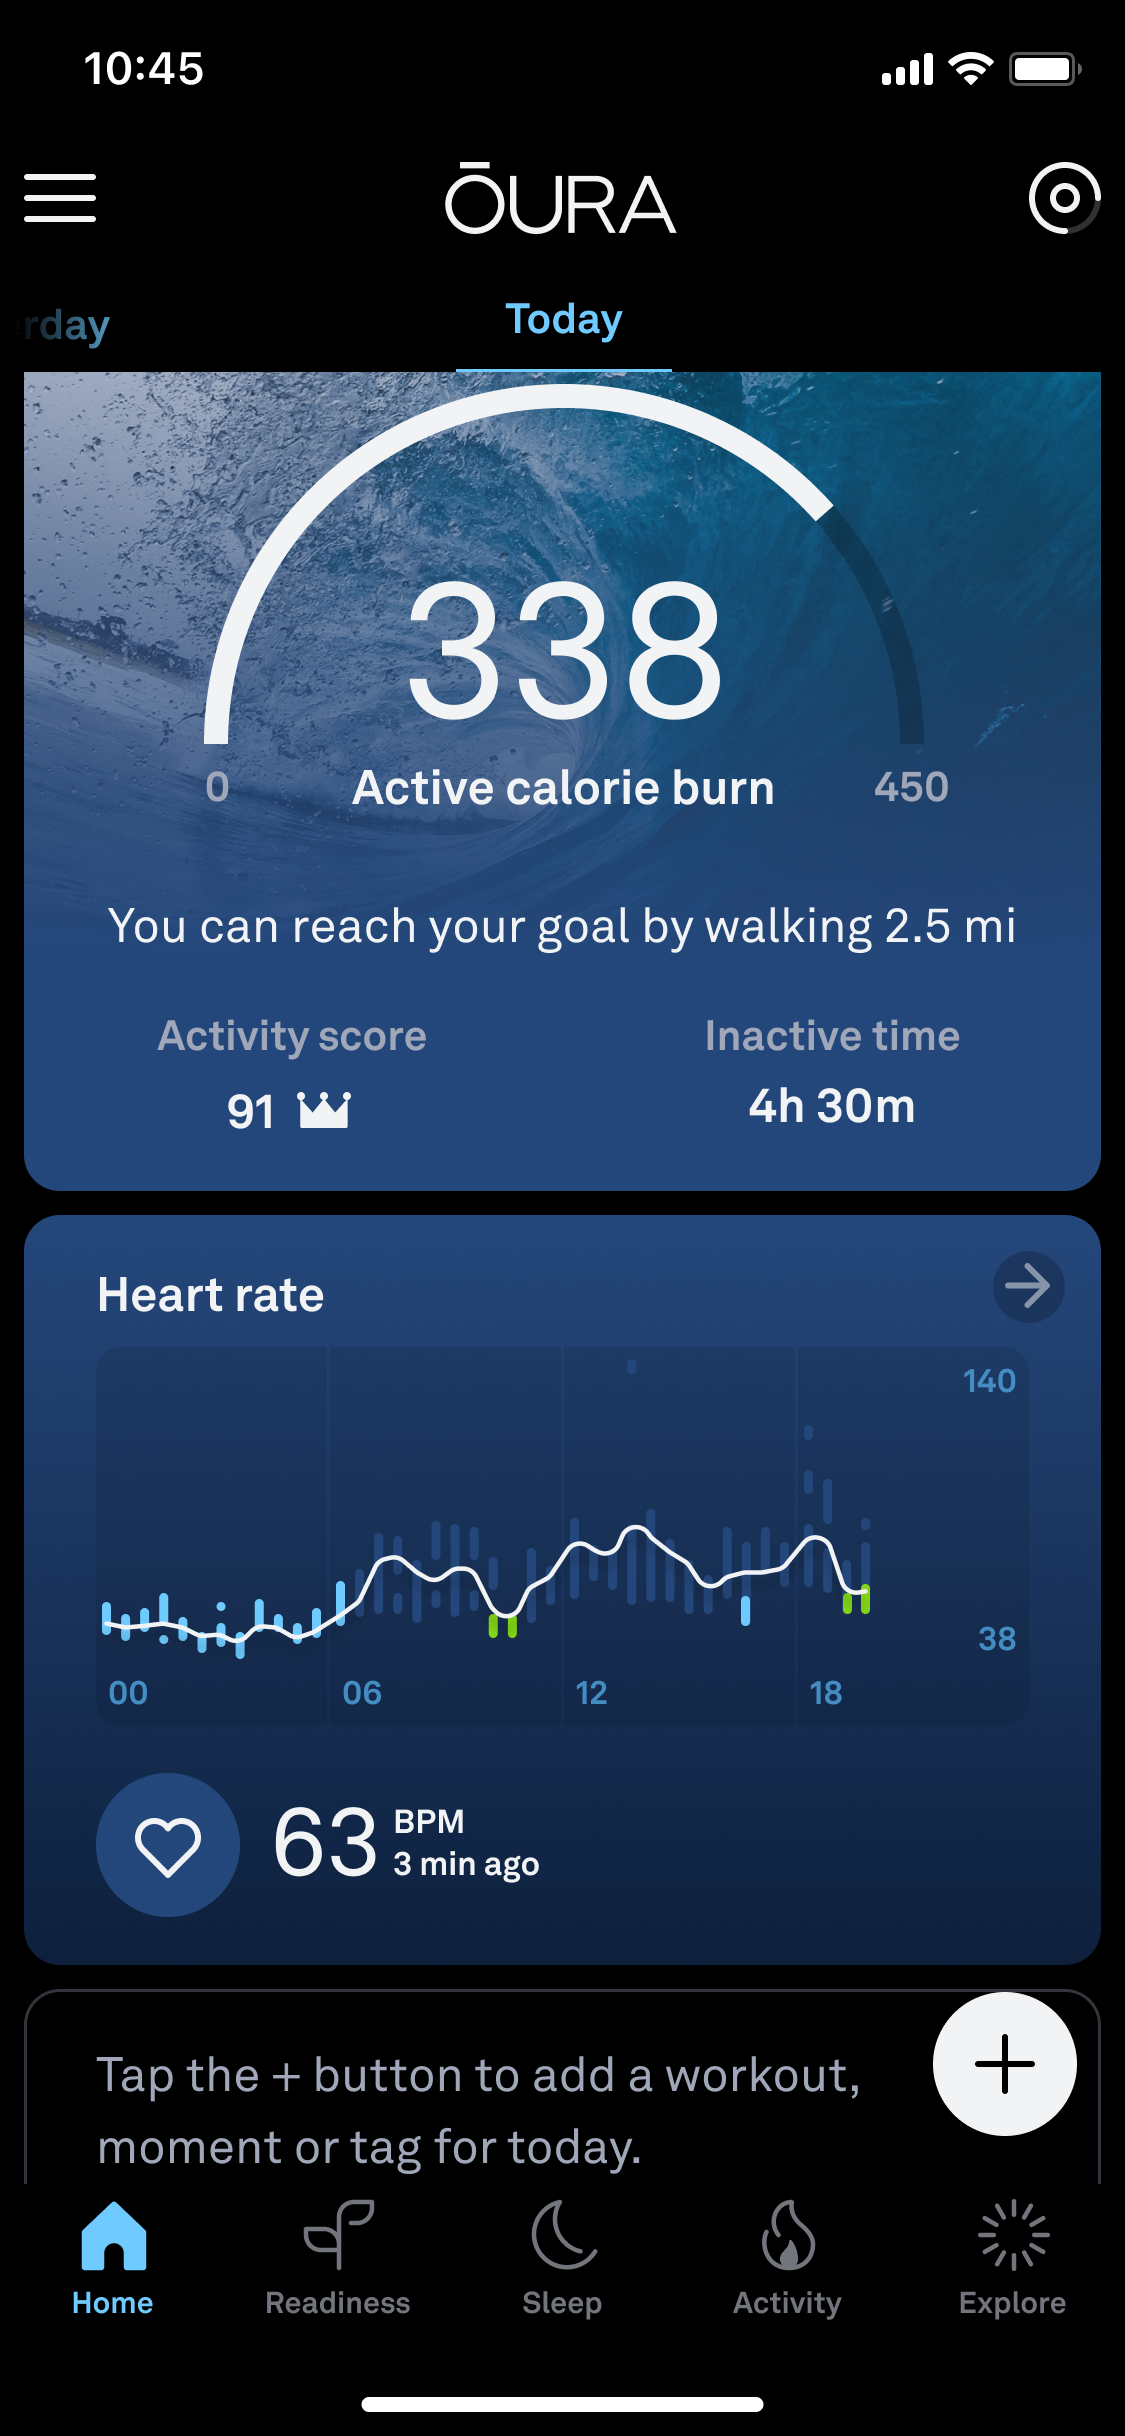 Screen shot of the Oura activity score and working heart rate 